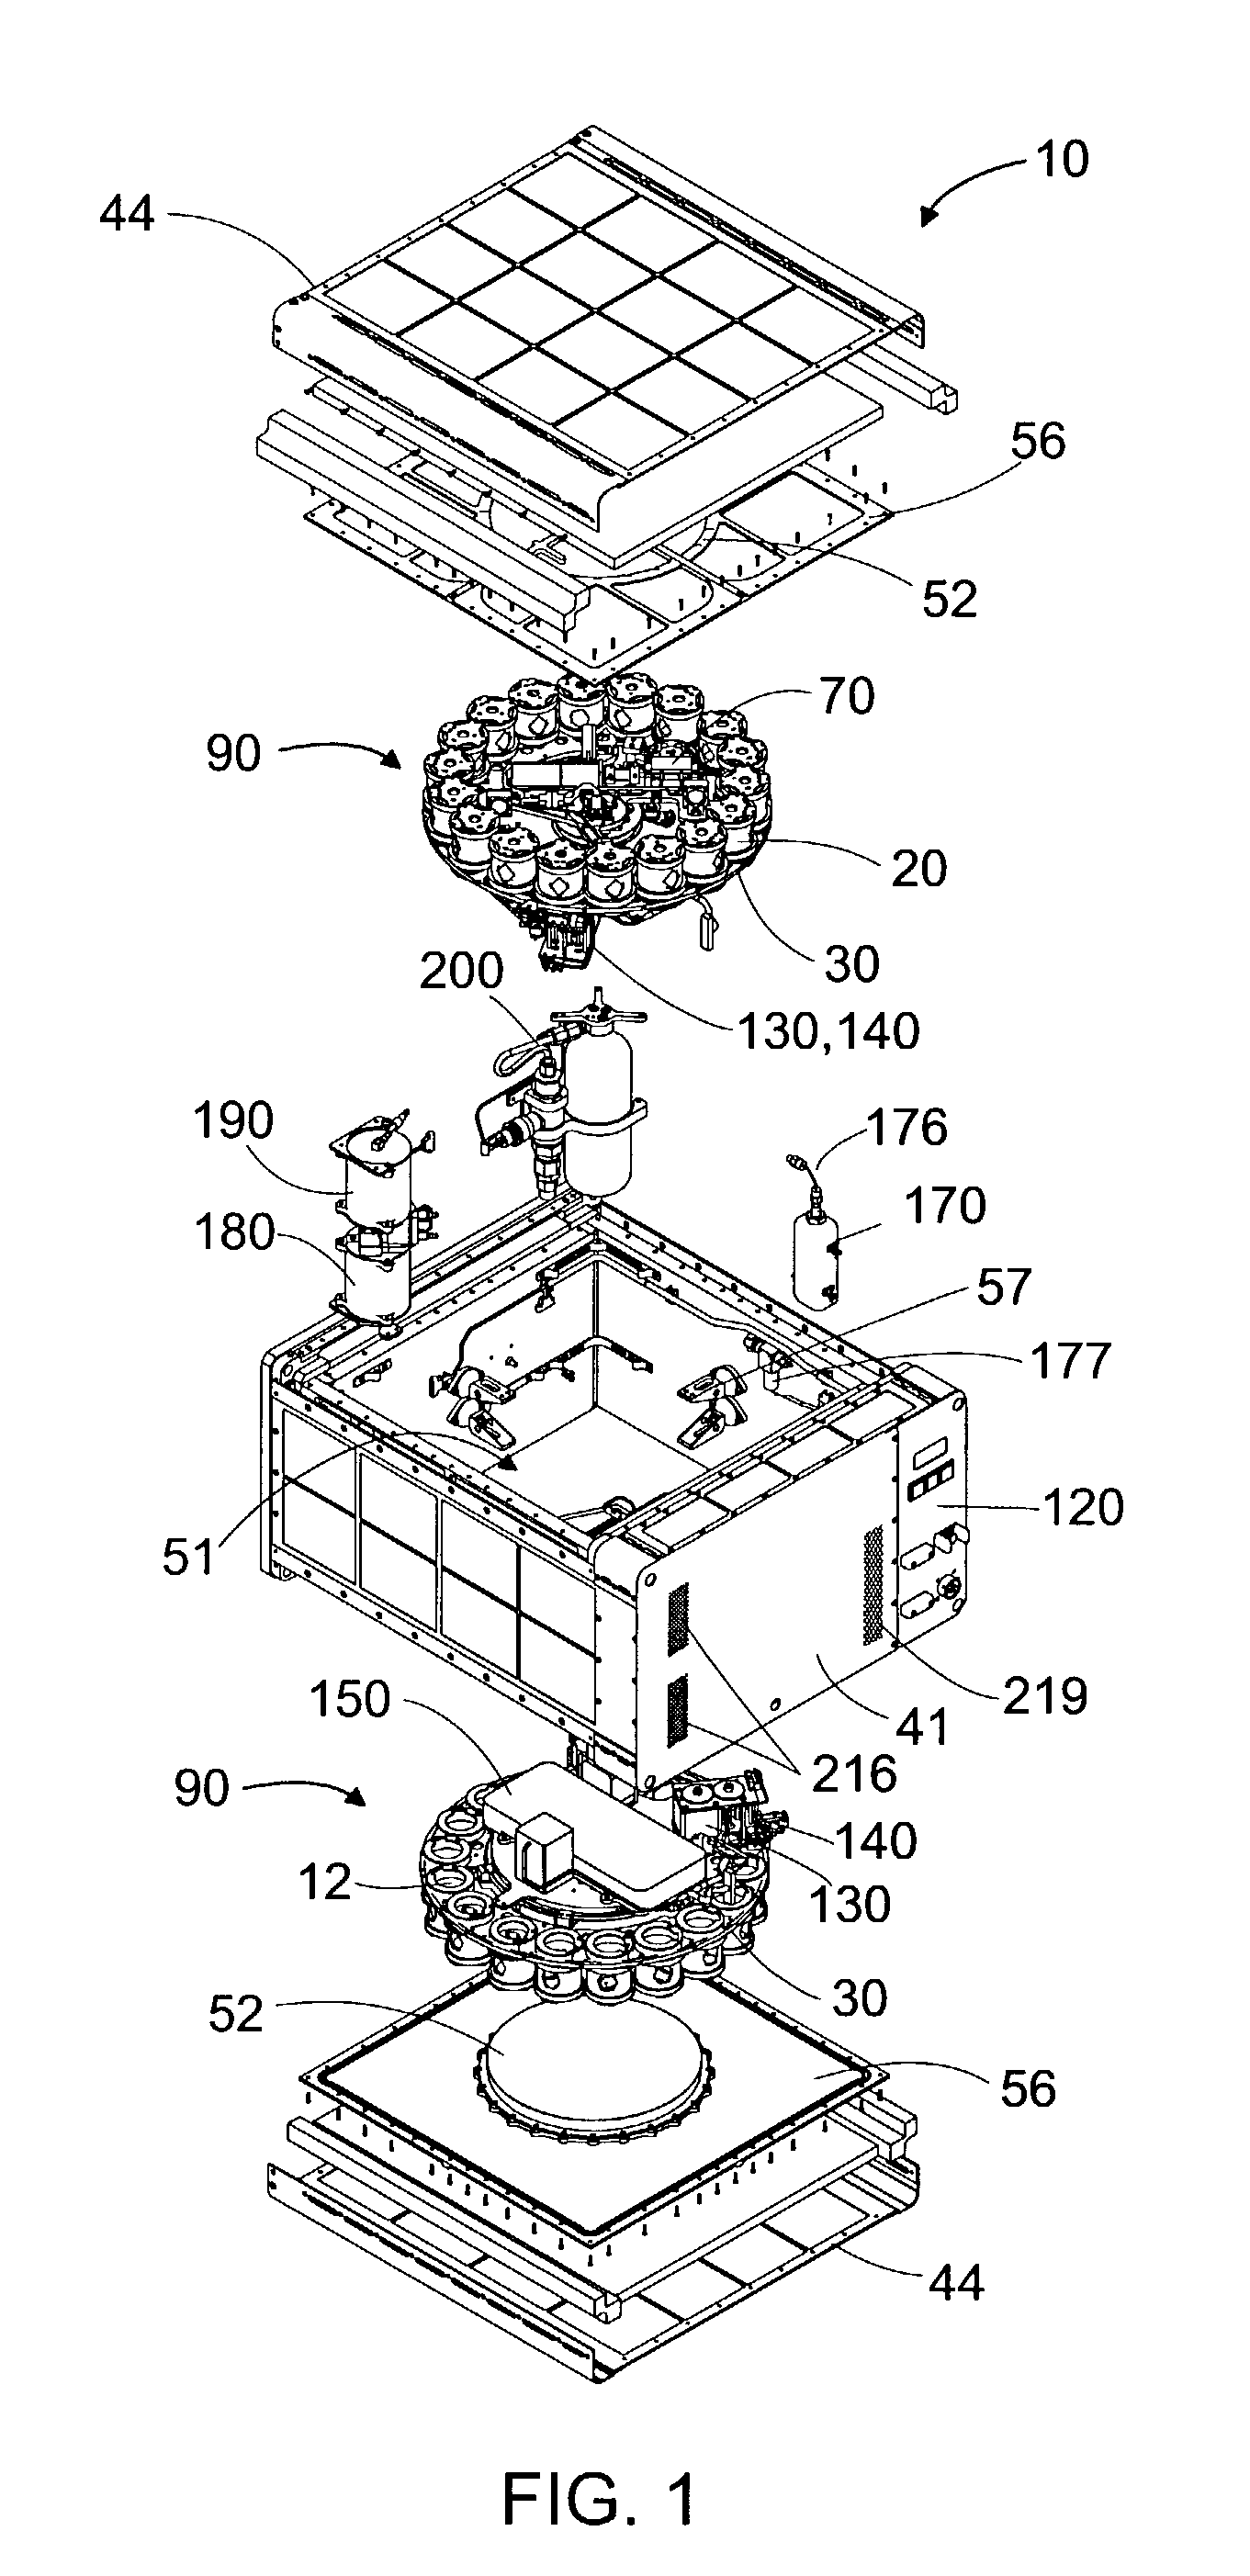 Apparatus and method for centrifugation and robotic manipulation of samples